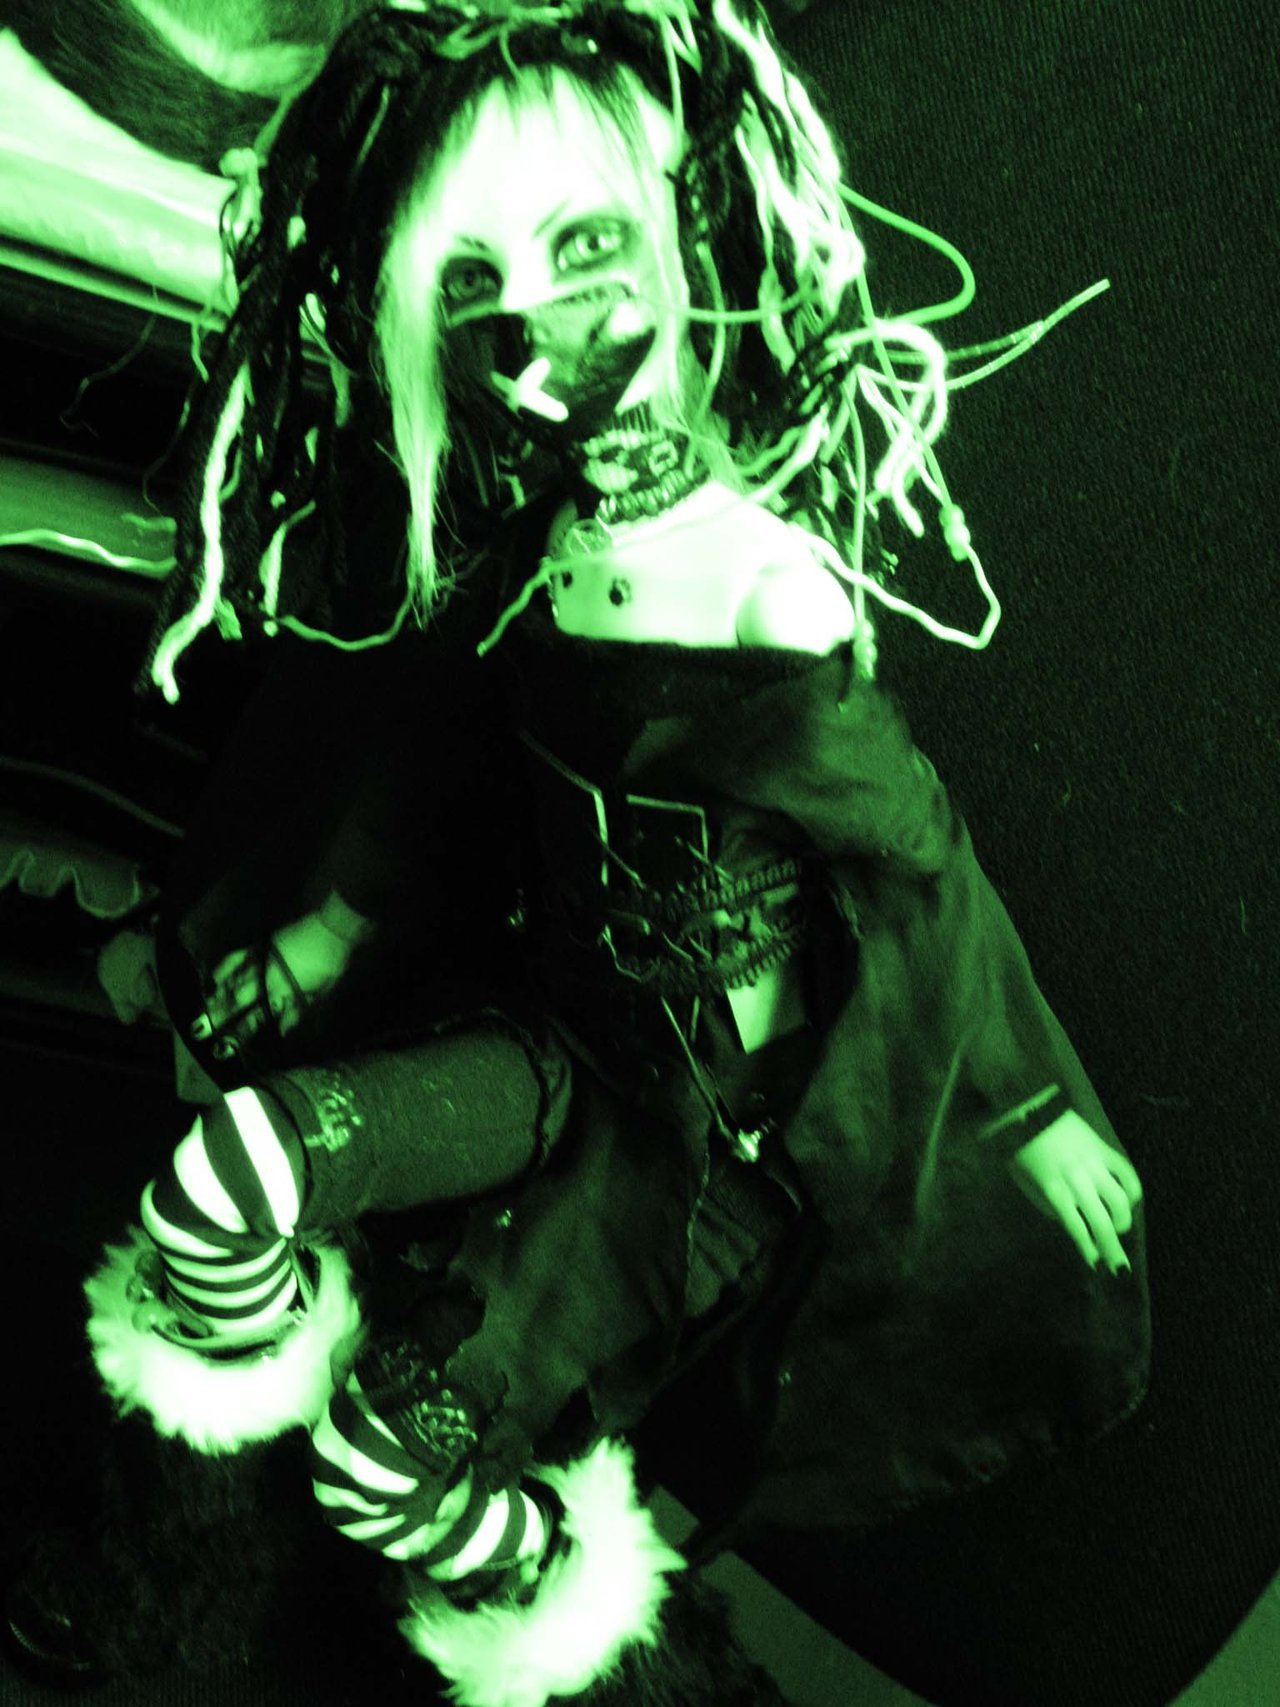 Cyber goth VIII by Dying Vampire on